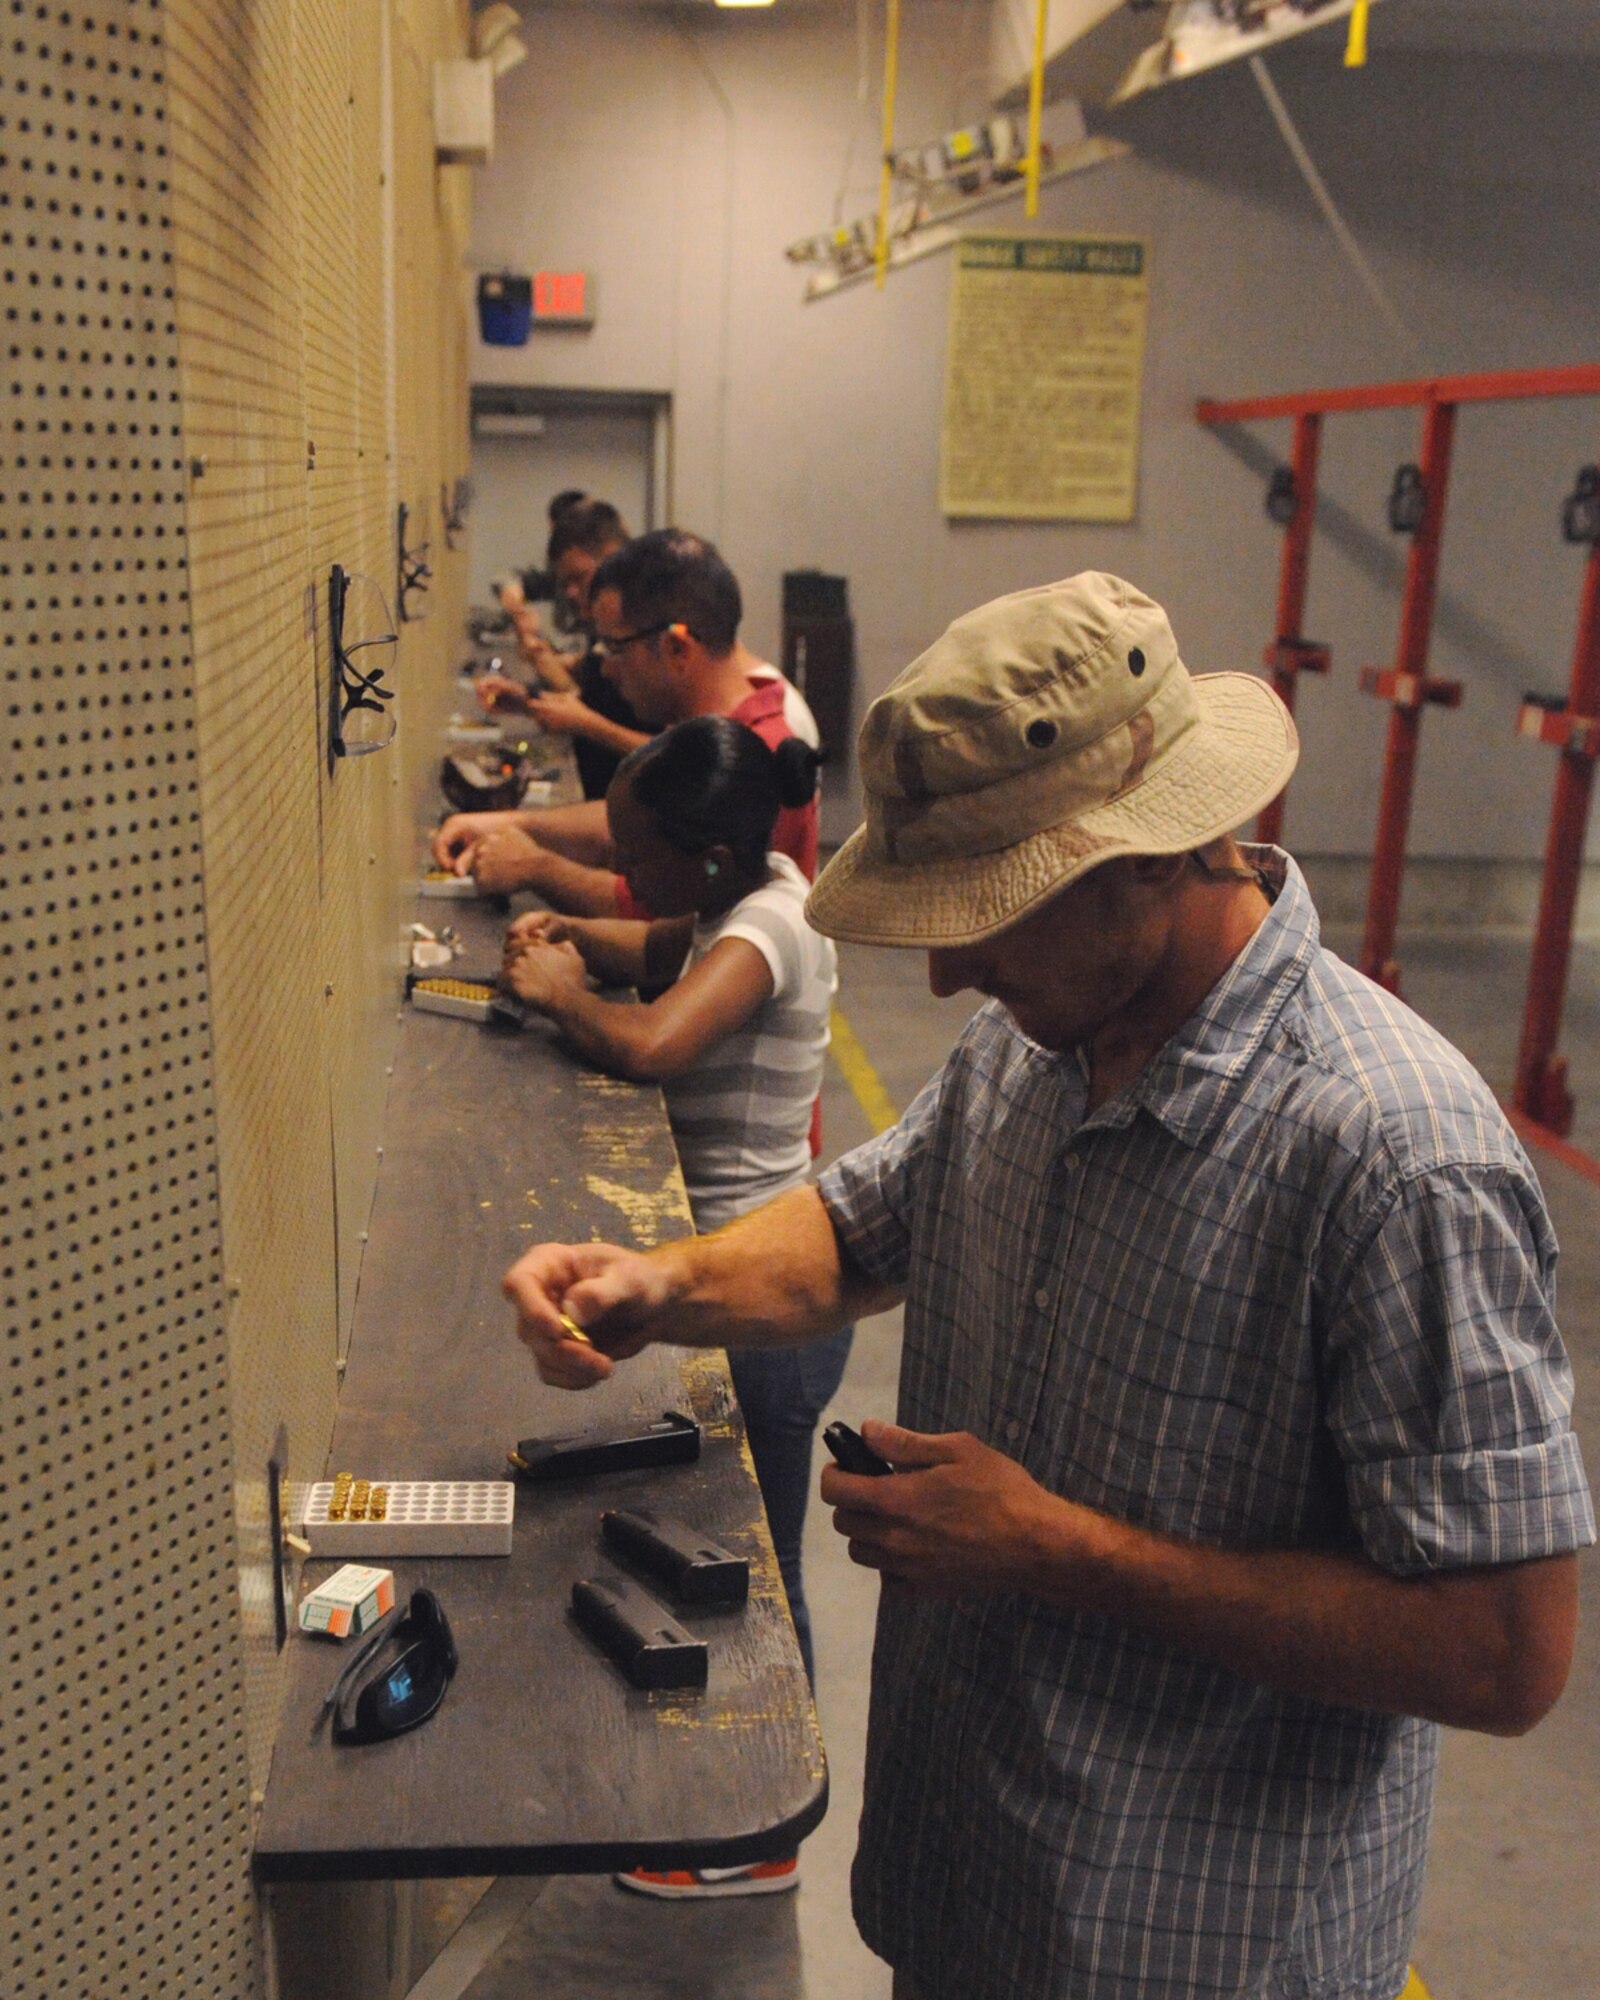 Contestants load 9mm pistol magazines before the Combat Arms Excellence in Competition 9mm Pistol Competition on Seymour Johnson Air Force Base, N.C., July 18, 2009. The program is open to any Air Force active duty, reserve, national guard members, Department of Defense civilians and dependants over the age of 18.  Individuals can earn awards by earning points in marksmanship competitions hosted by military services. (U.S. Air Force photo by Airman 1st Class Whitney S. Lambert) 